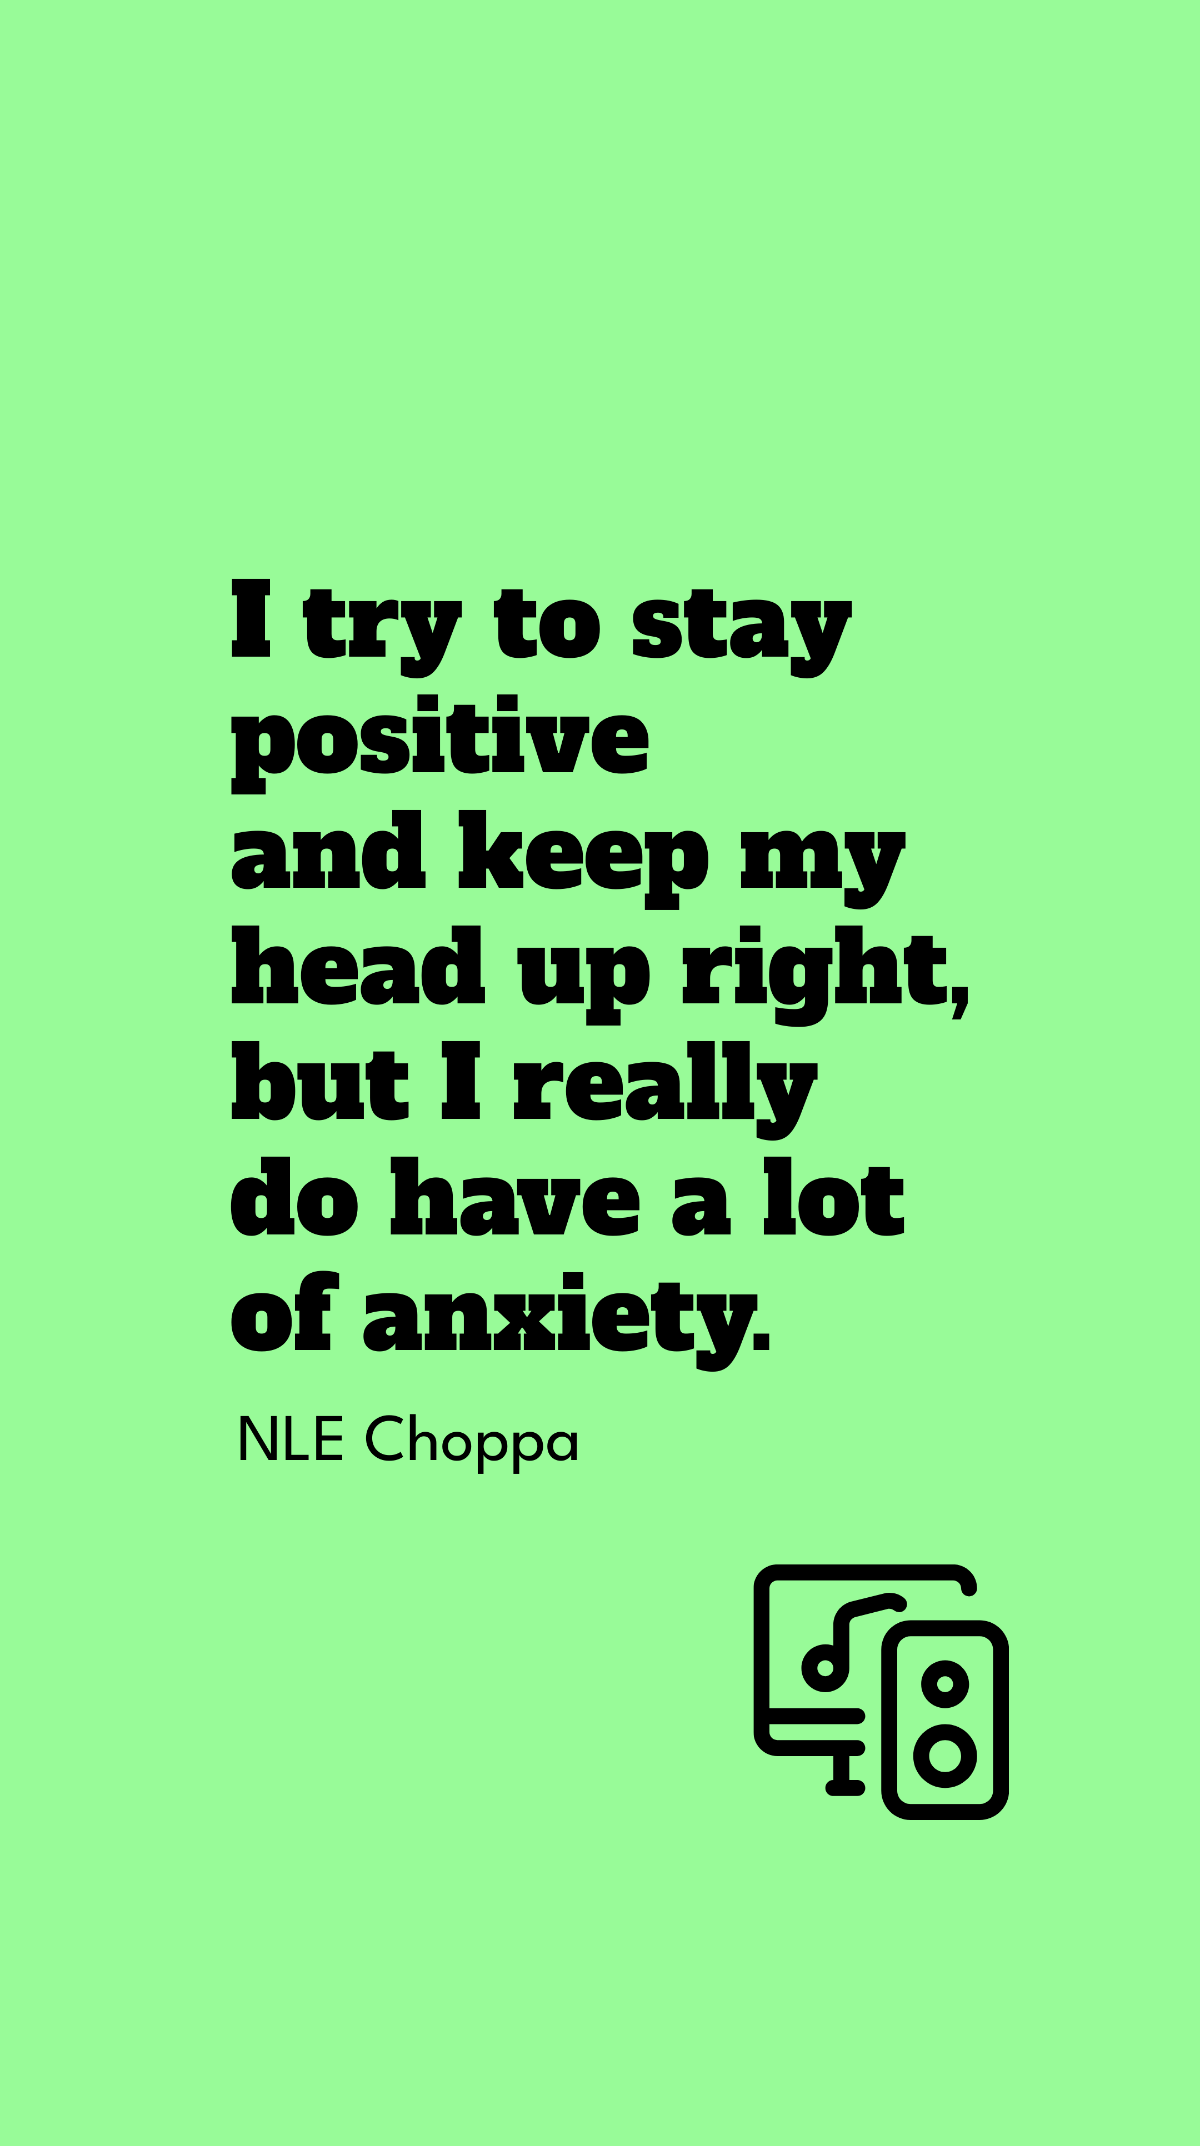 NLE Choppa - I try to stay positive and keep my head up right, but I really do have a lot of anxiety.